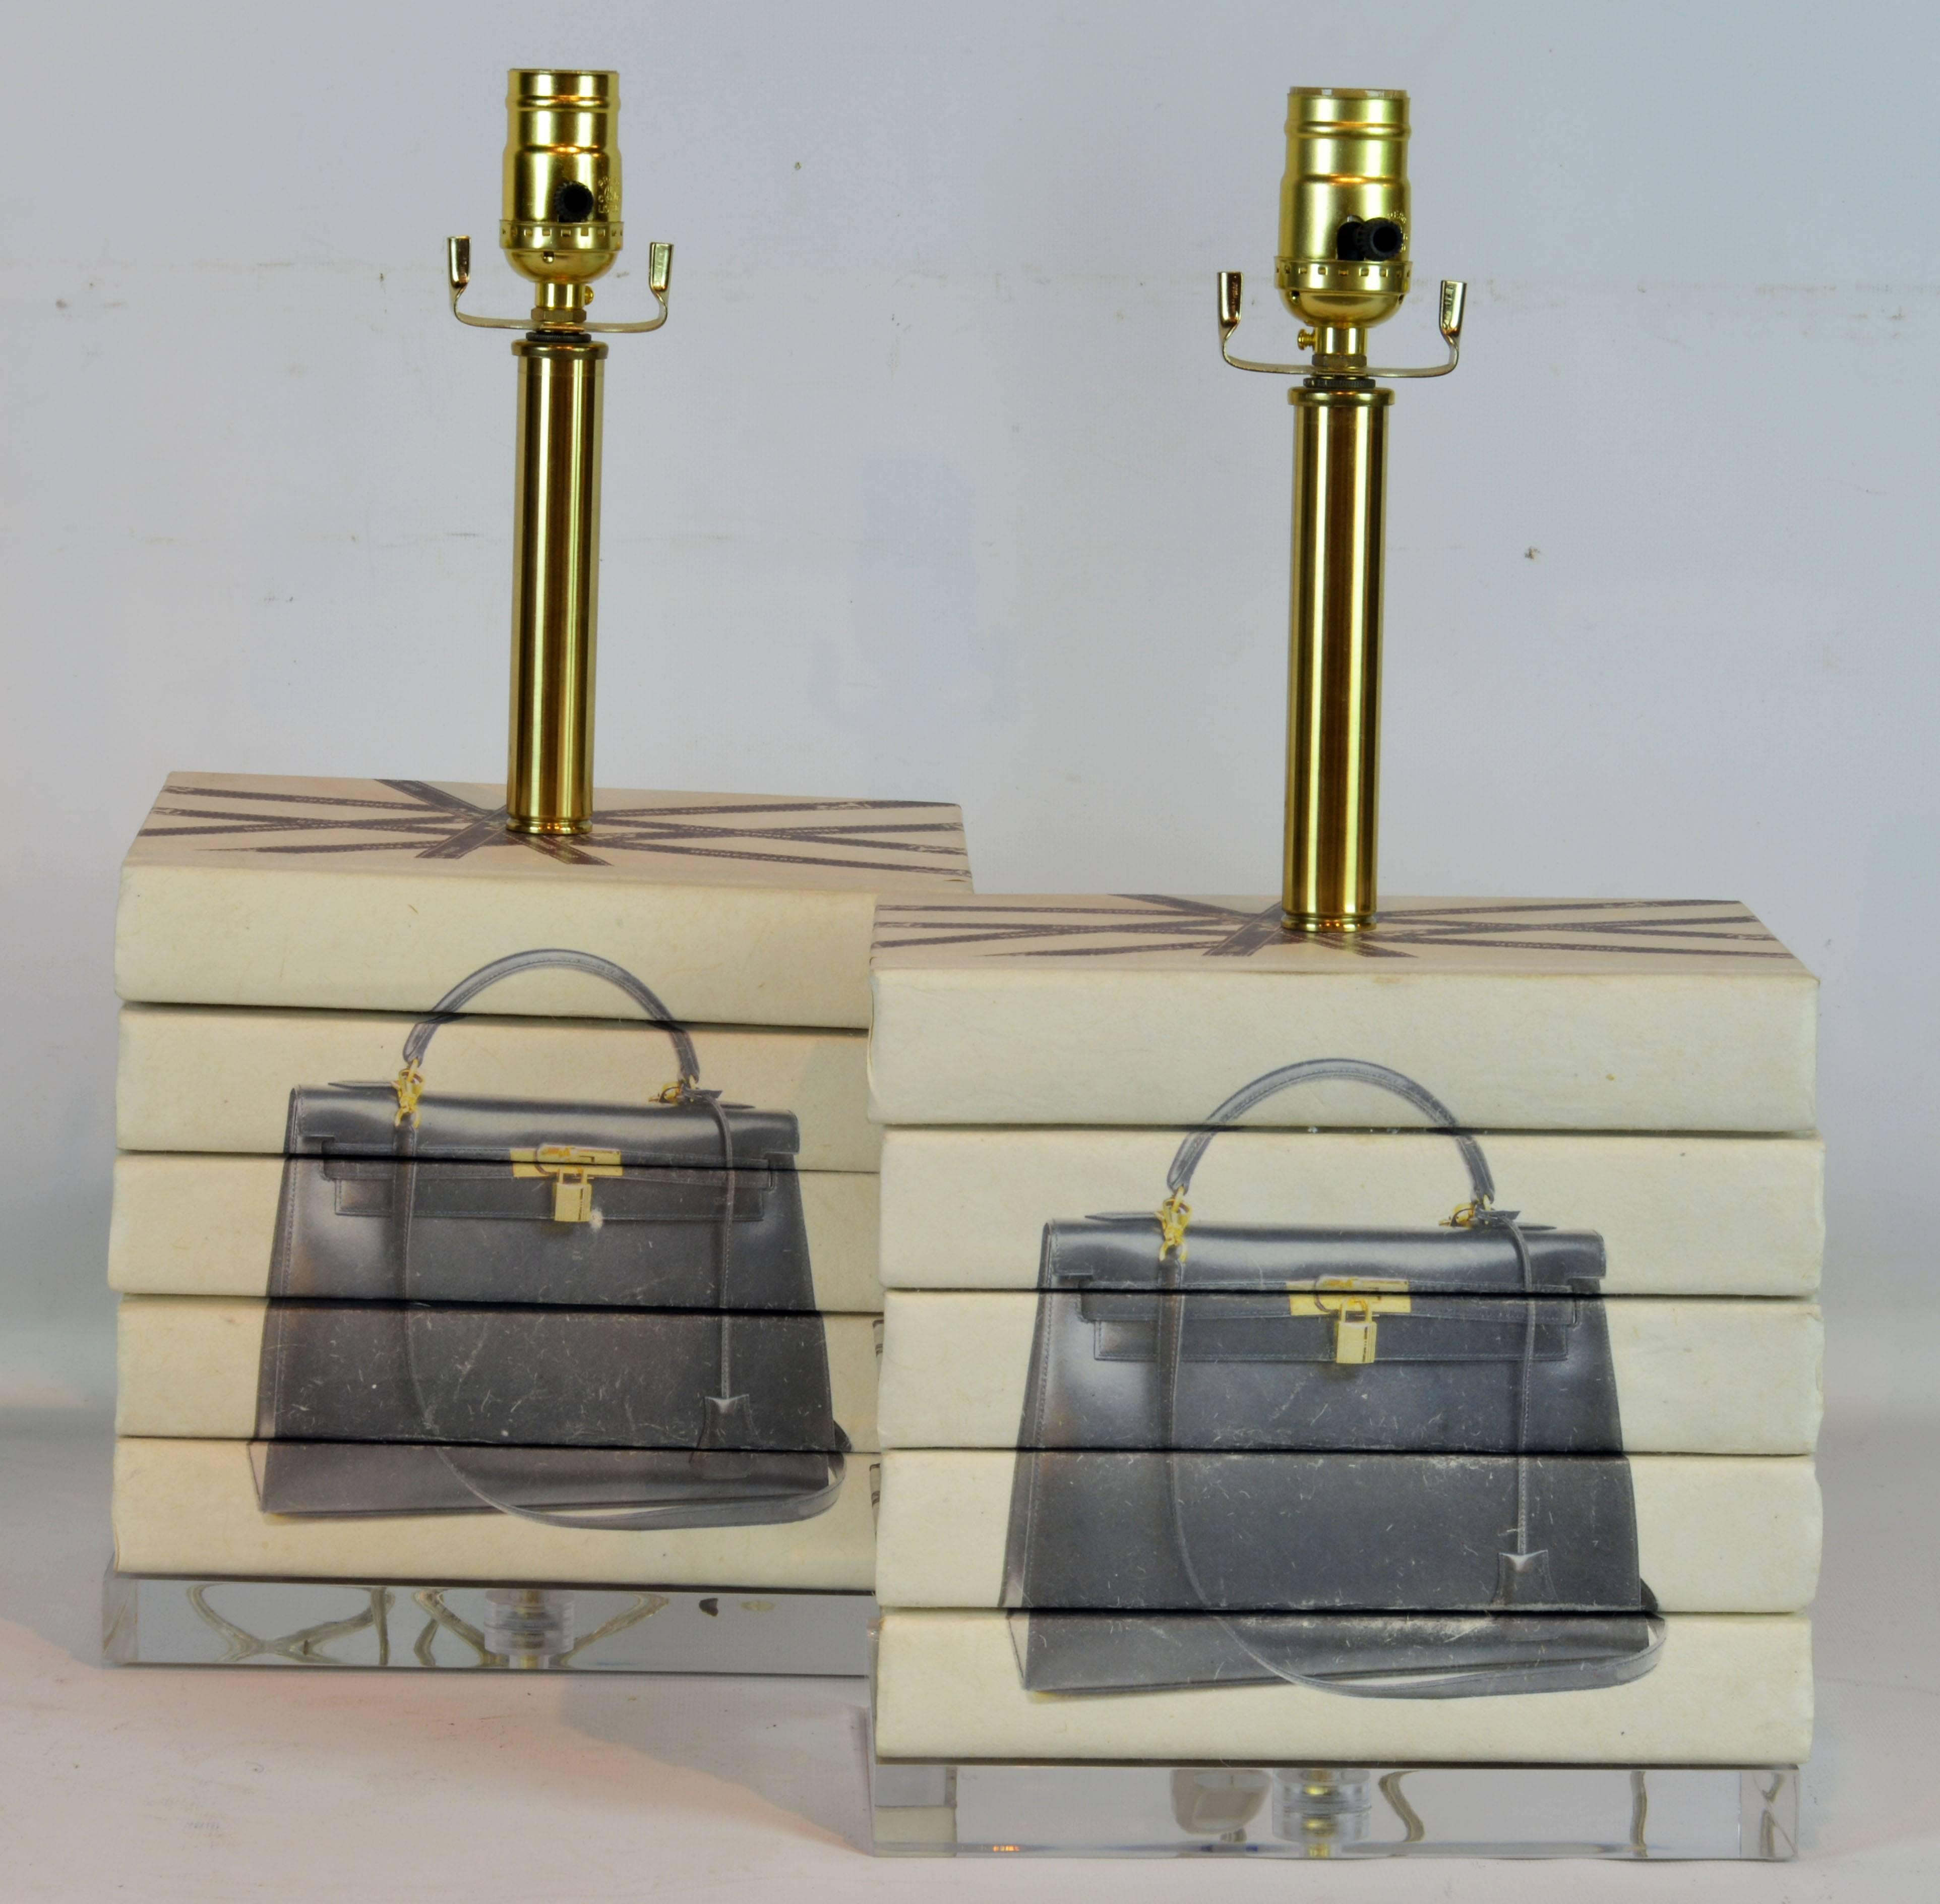 20th Century Pair of Vintage Custom Designed Book Lamps with Fashion Decor on Lucite Bases